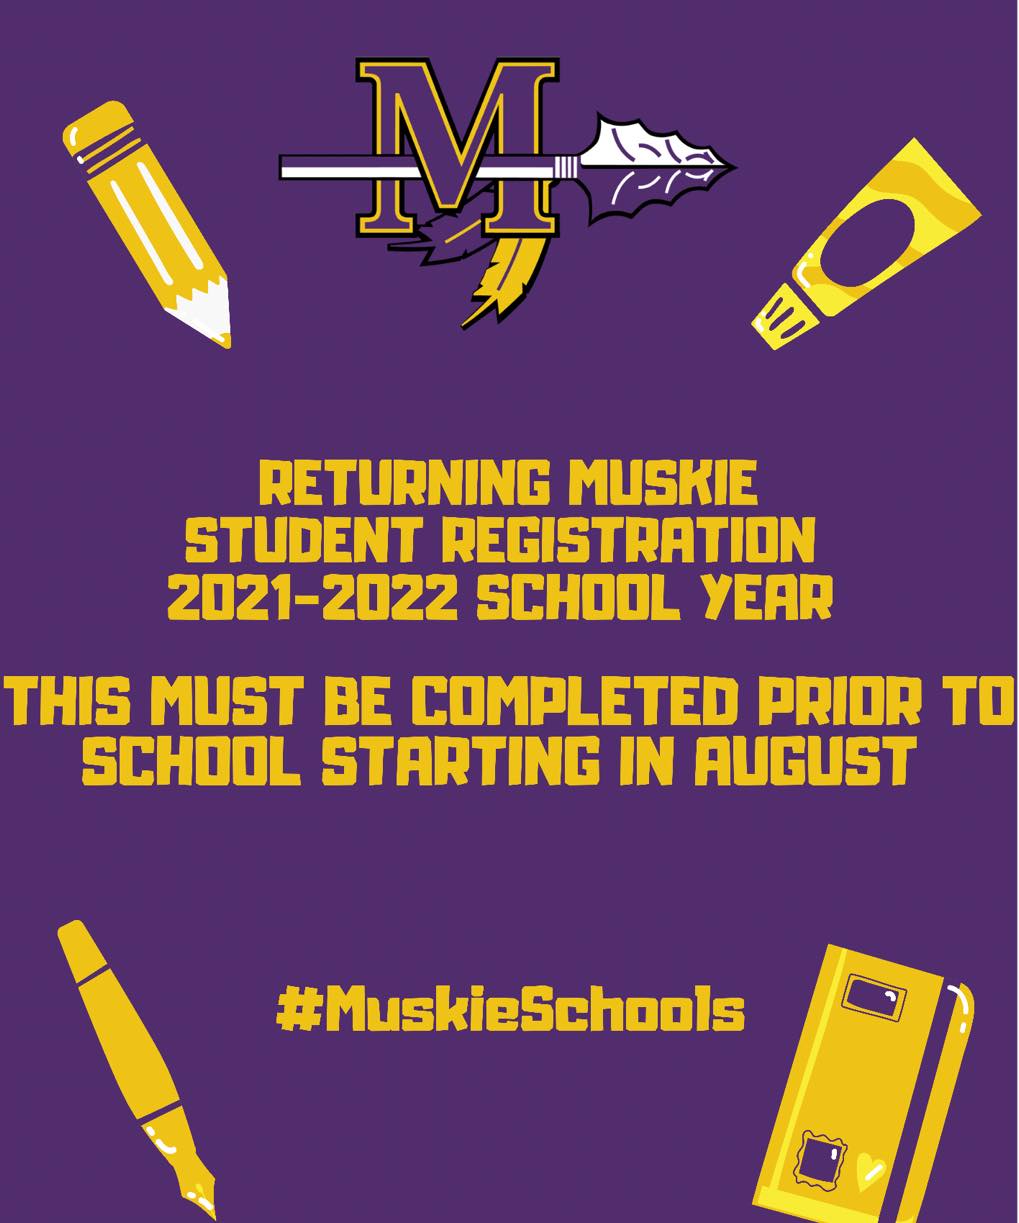 Returning Muskie Student Registration is now open for the 2021 to 2022 school year. Graphic explaining this used online and social media. 